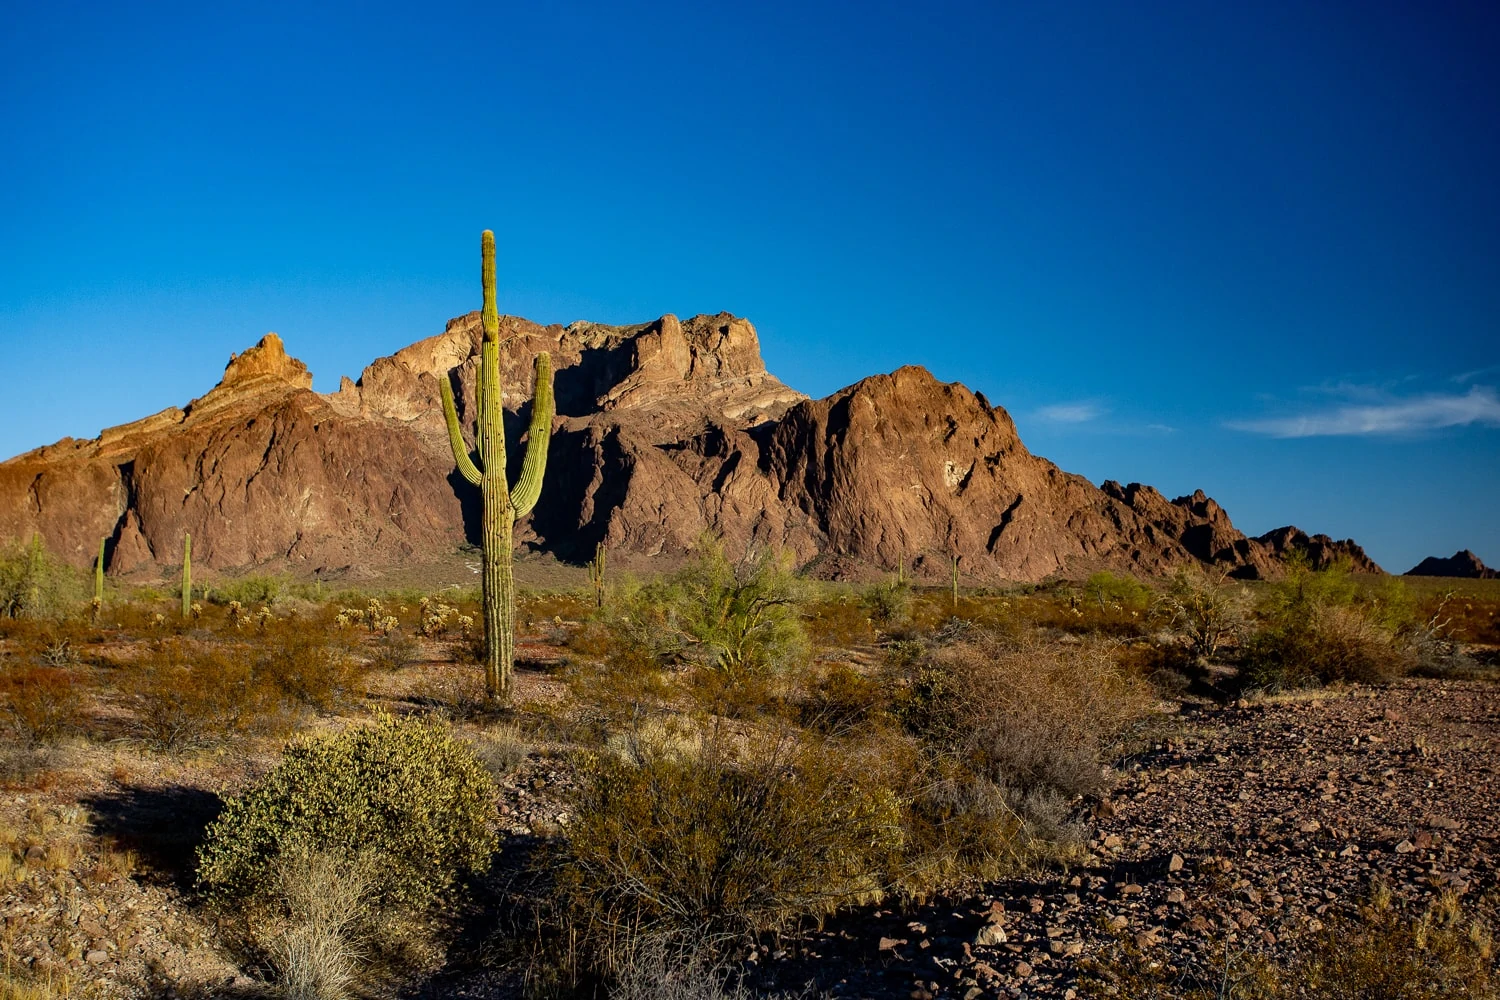 A green cactus stands in a desert valley to the backdrop of a deep brown-colored mountain range in Saguaro National Park.